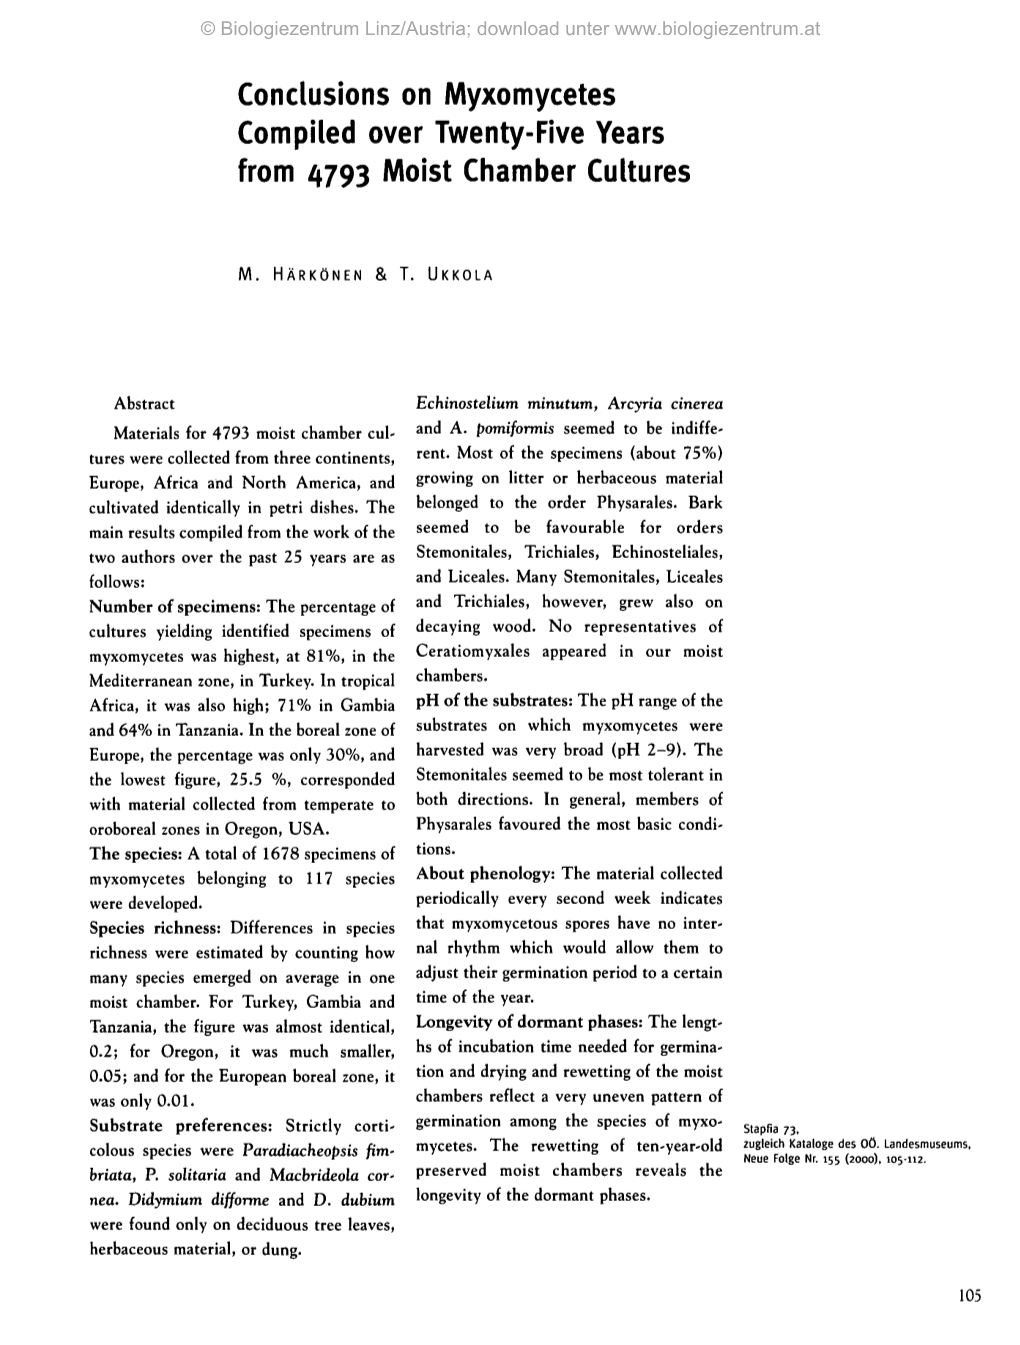 Conclusions on Myxomycetes Compiled Over Twenty-Five Years from 4793 Moist Chamber Cultures